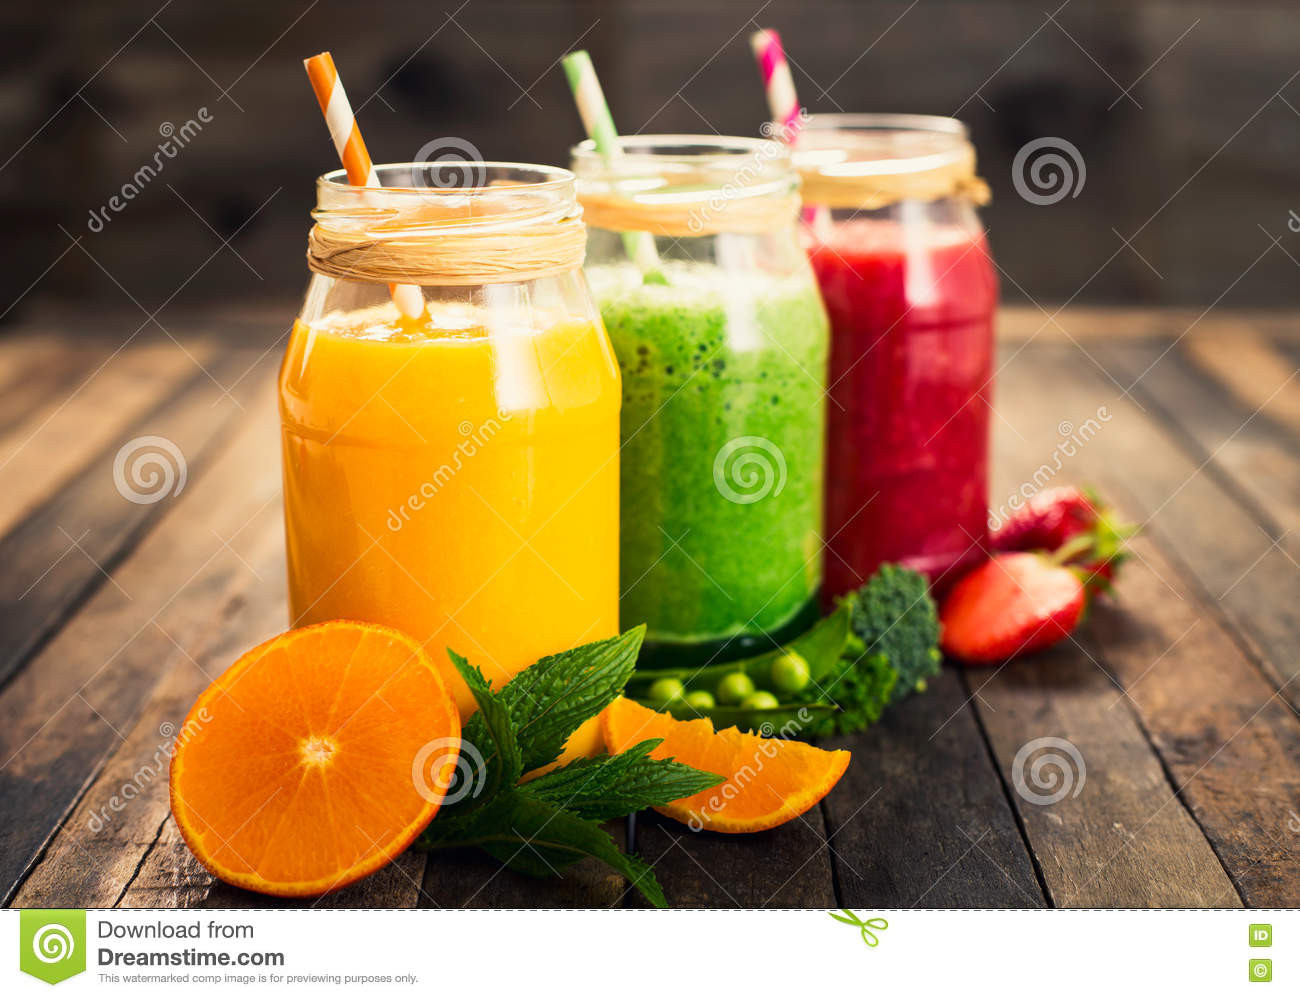 Veg And Fruit Smoothies
 Healthy Fruit And Ve able Smoothies Stock Image Image